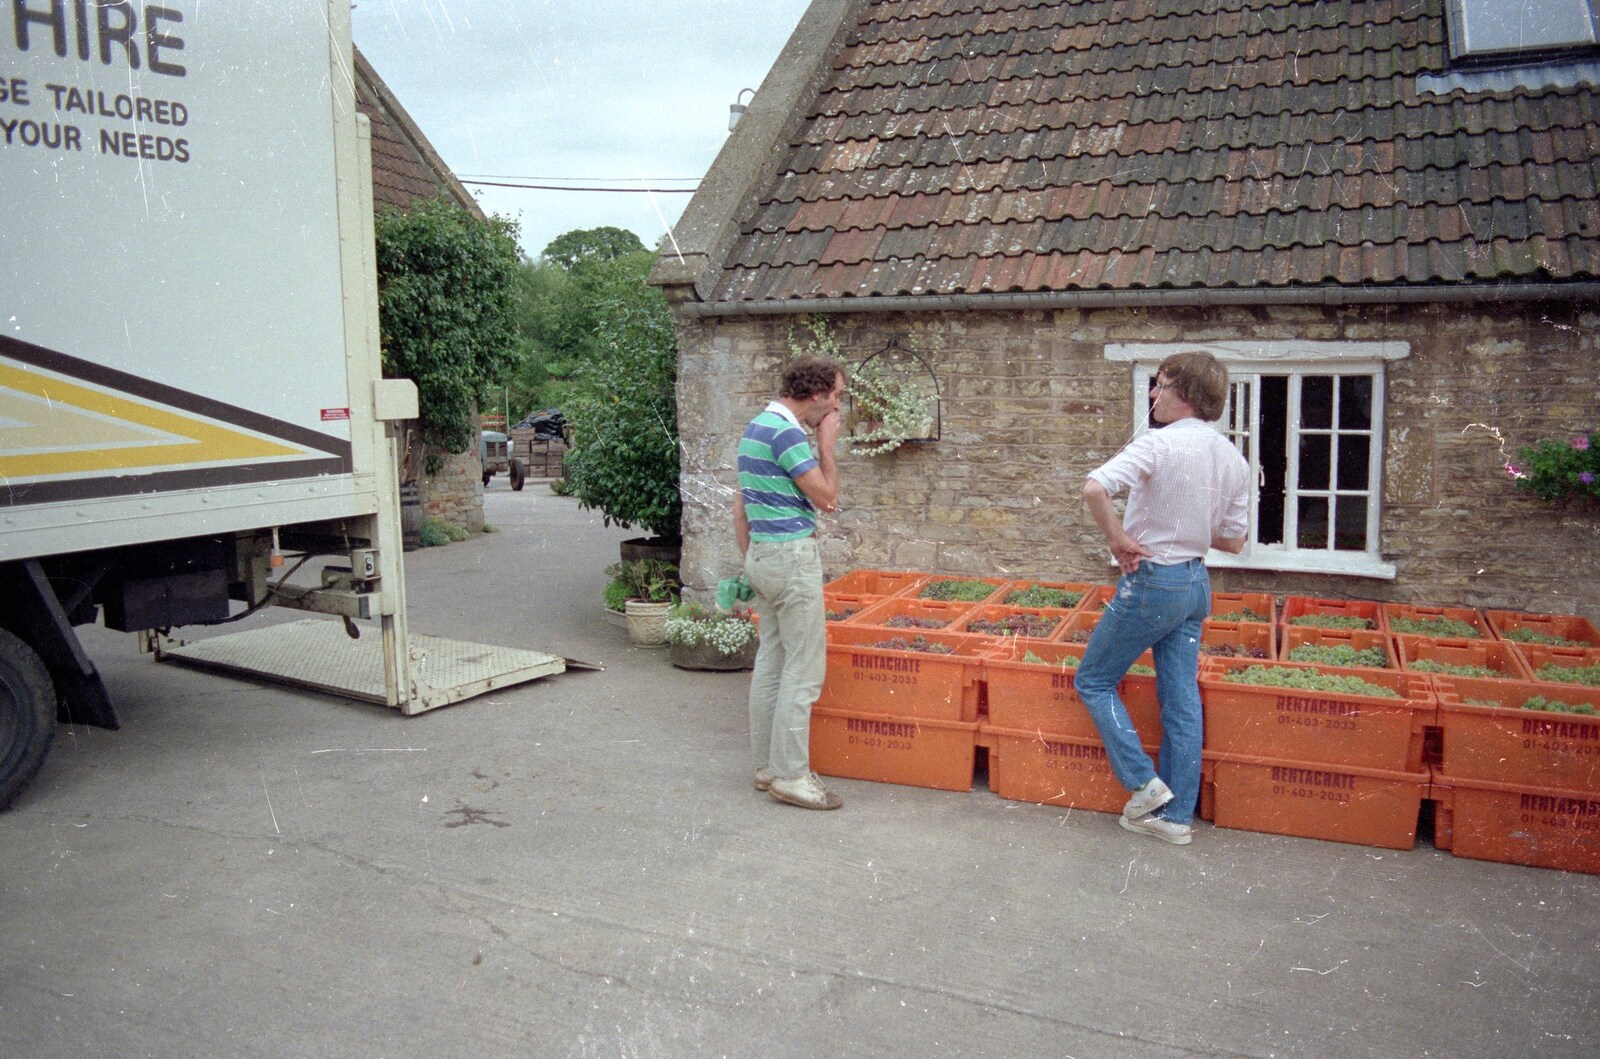 Mike checks over the grapes from Harrow Vineyard Harvest and Wootton Winery, Dorset and Somerset - 5th September 1989